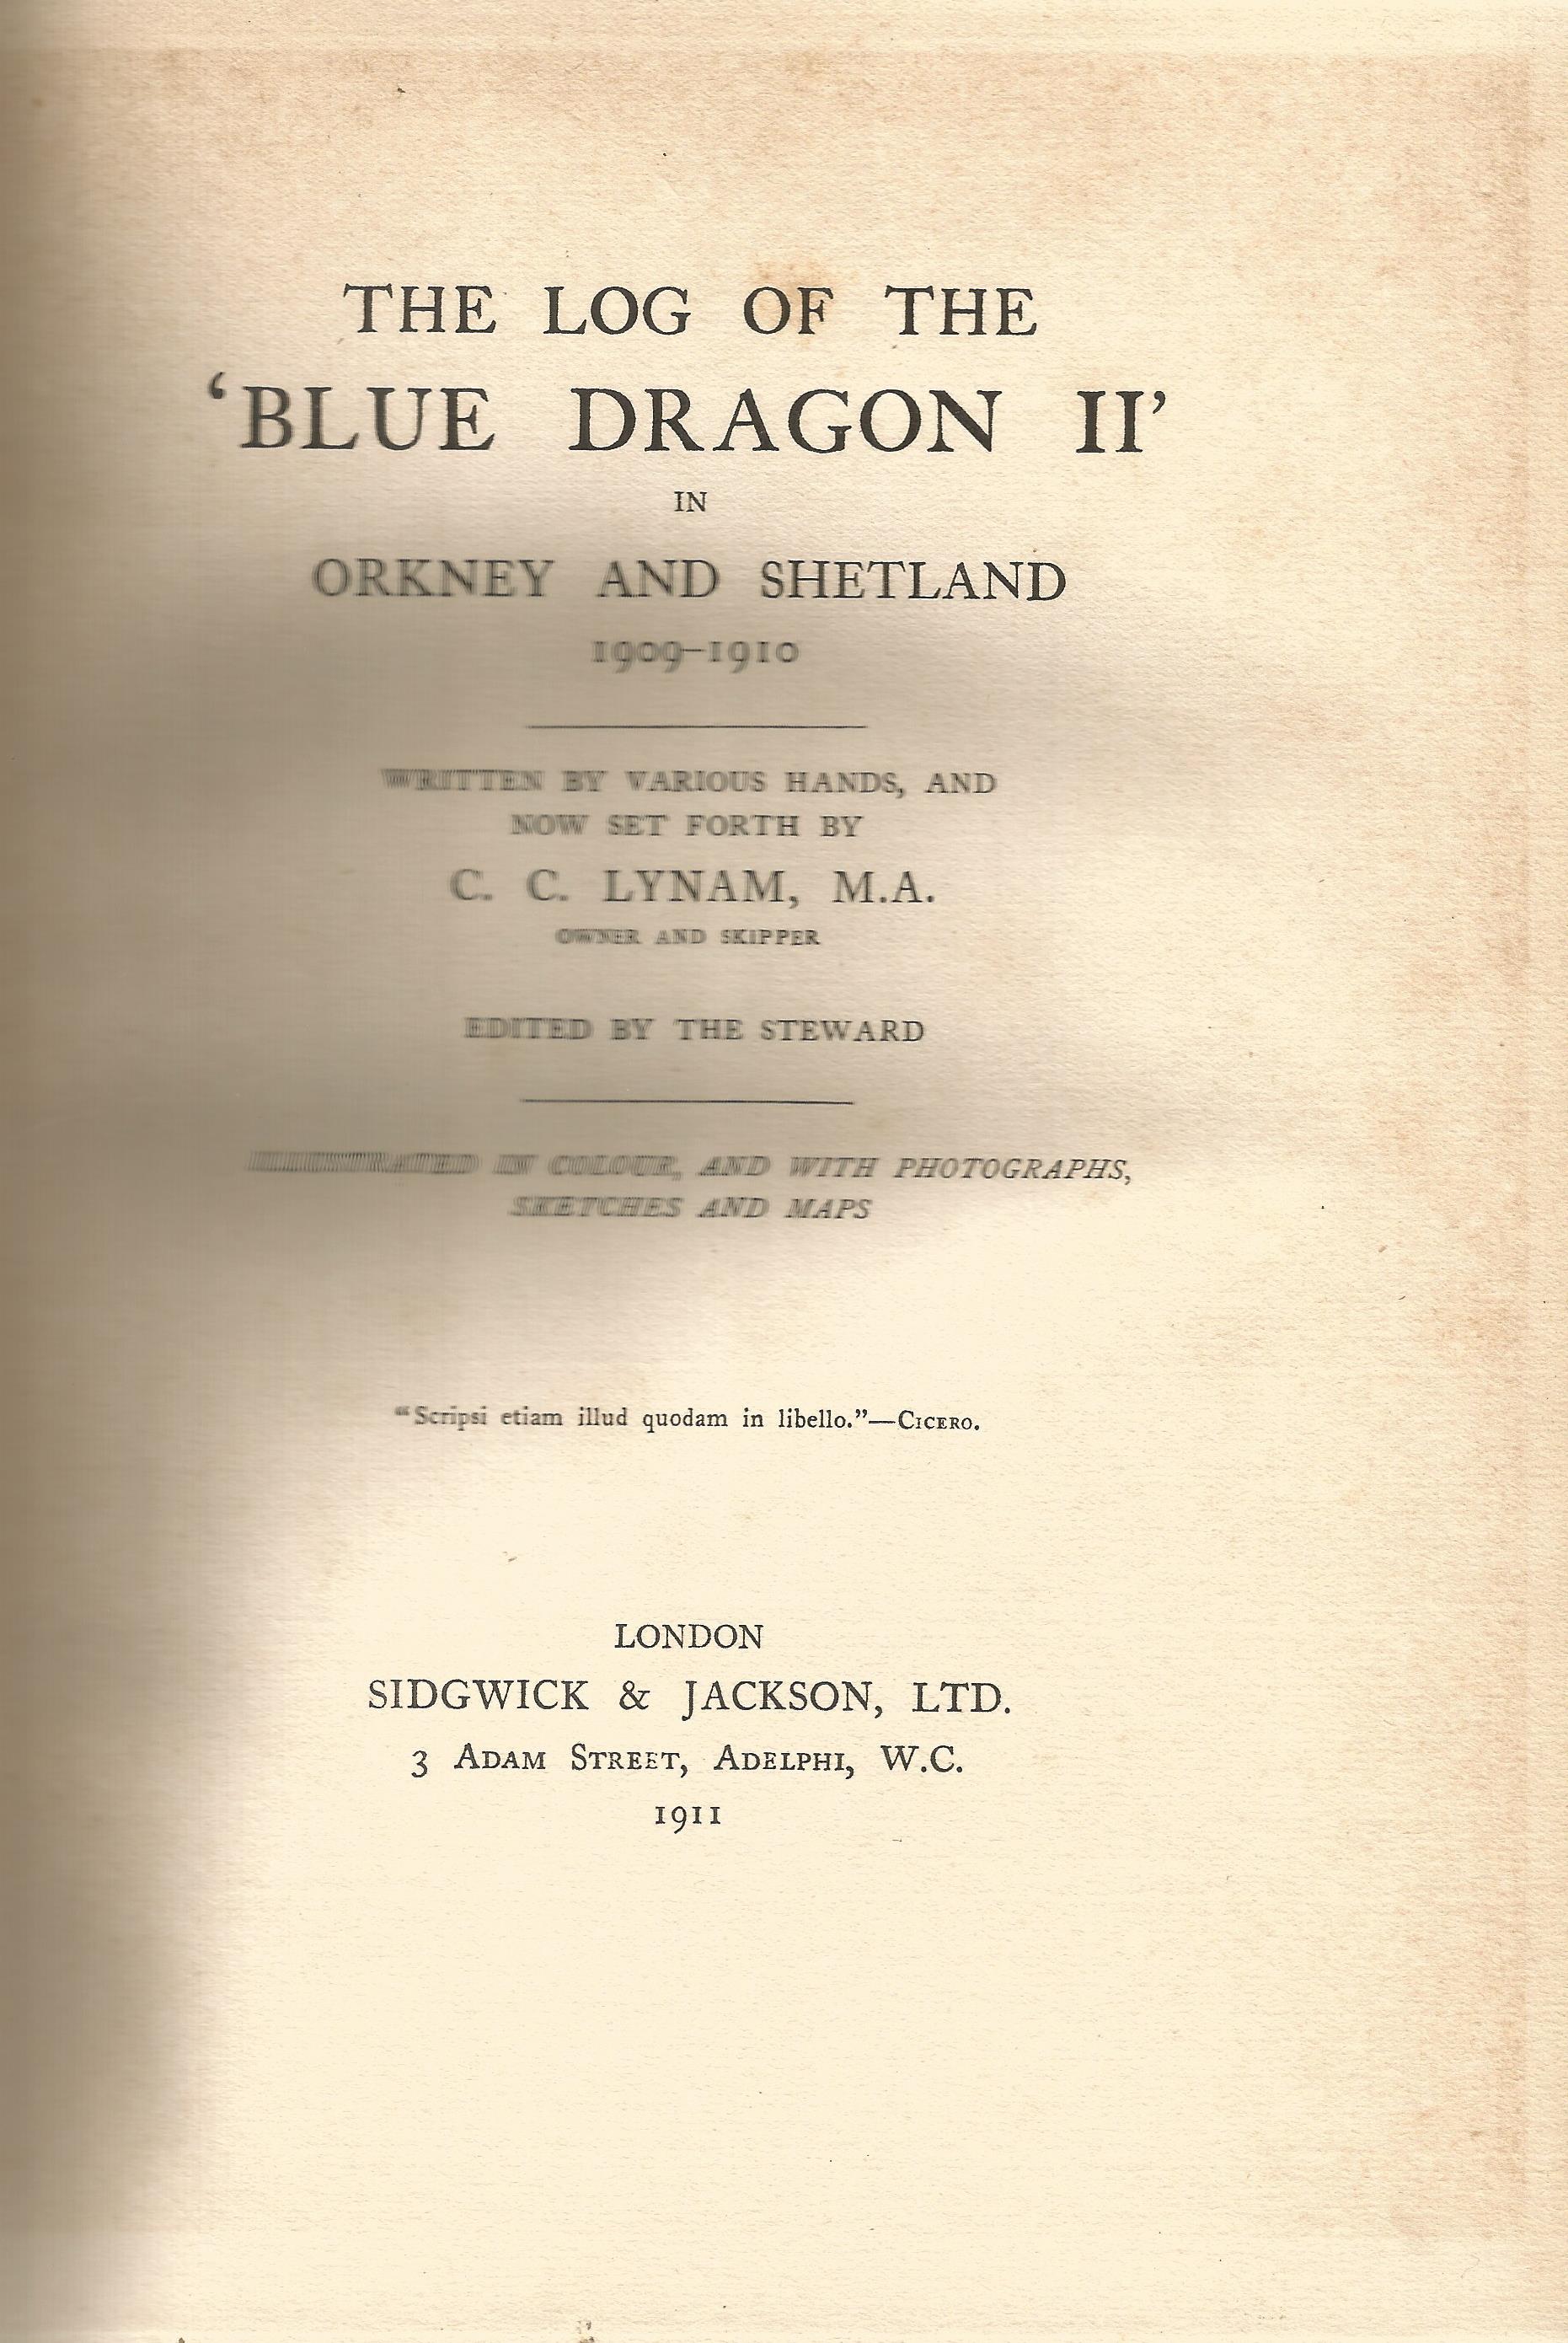 The Log of the 'Blue Dragon II' in Orkney and Shetland 1909 1910 by C C Lynam 1911 Hardback Book - Image 2 of 2